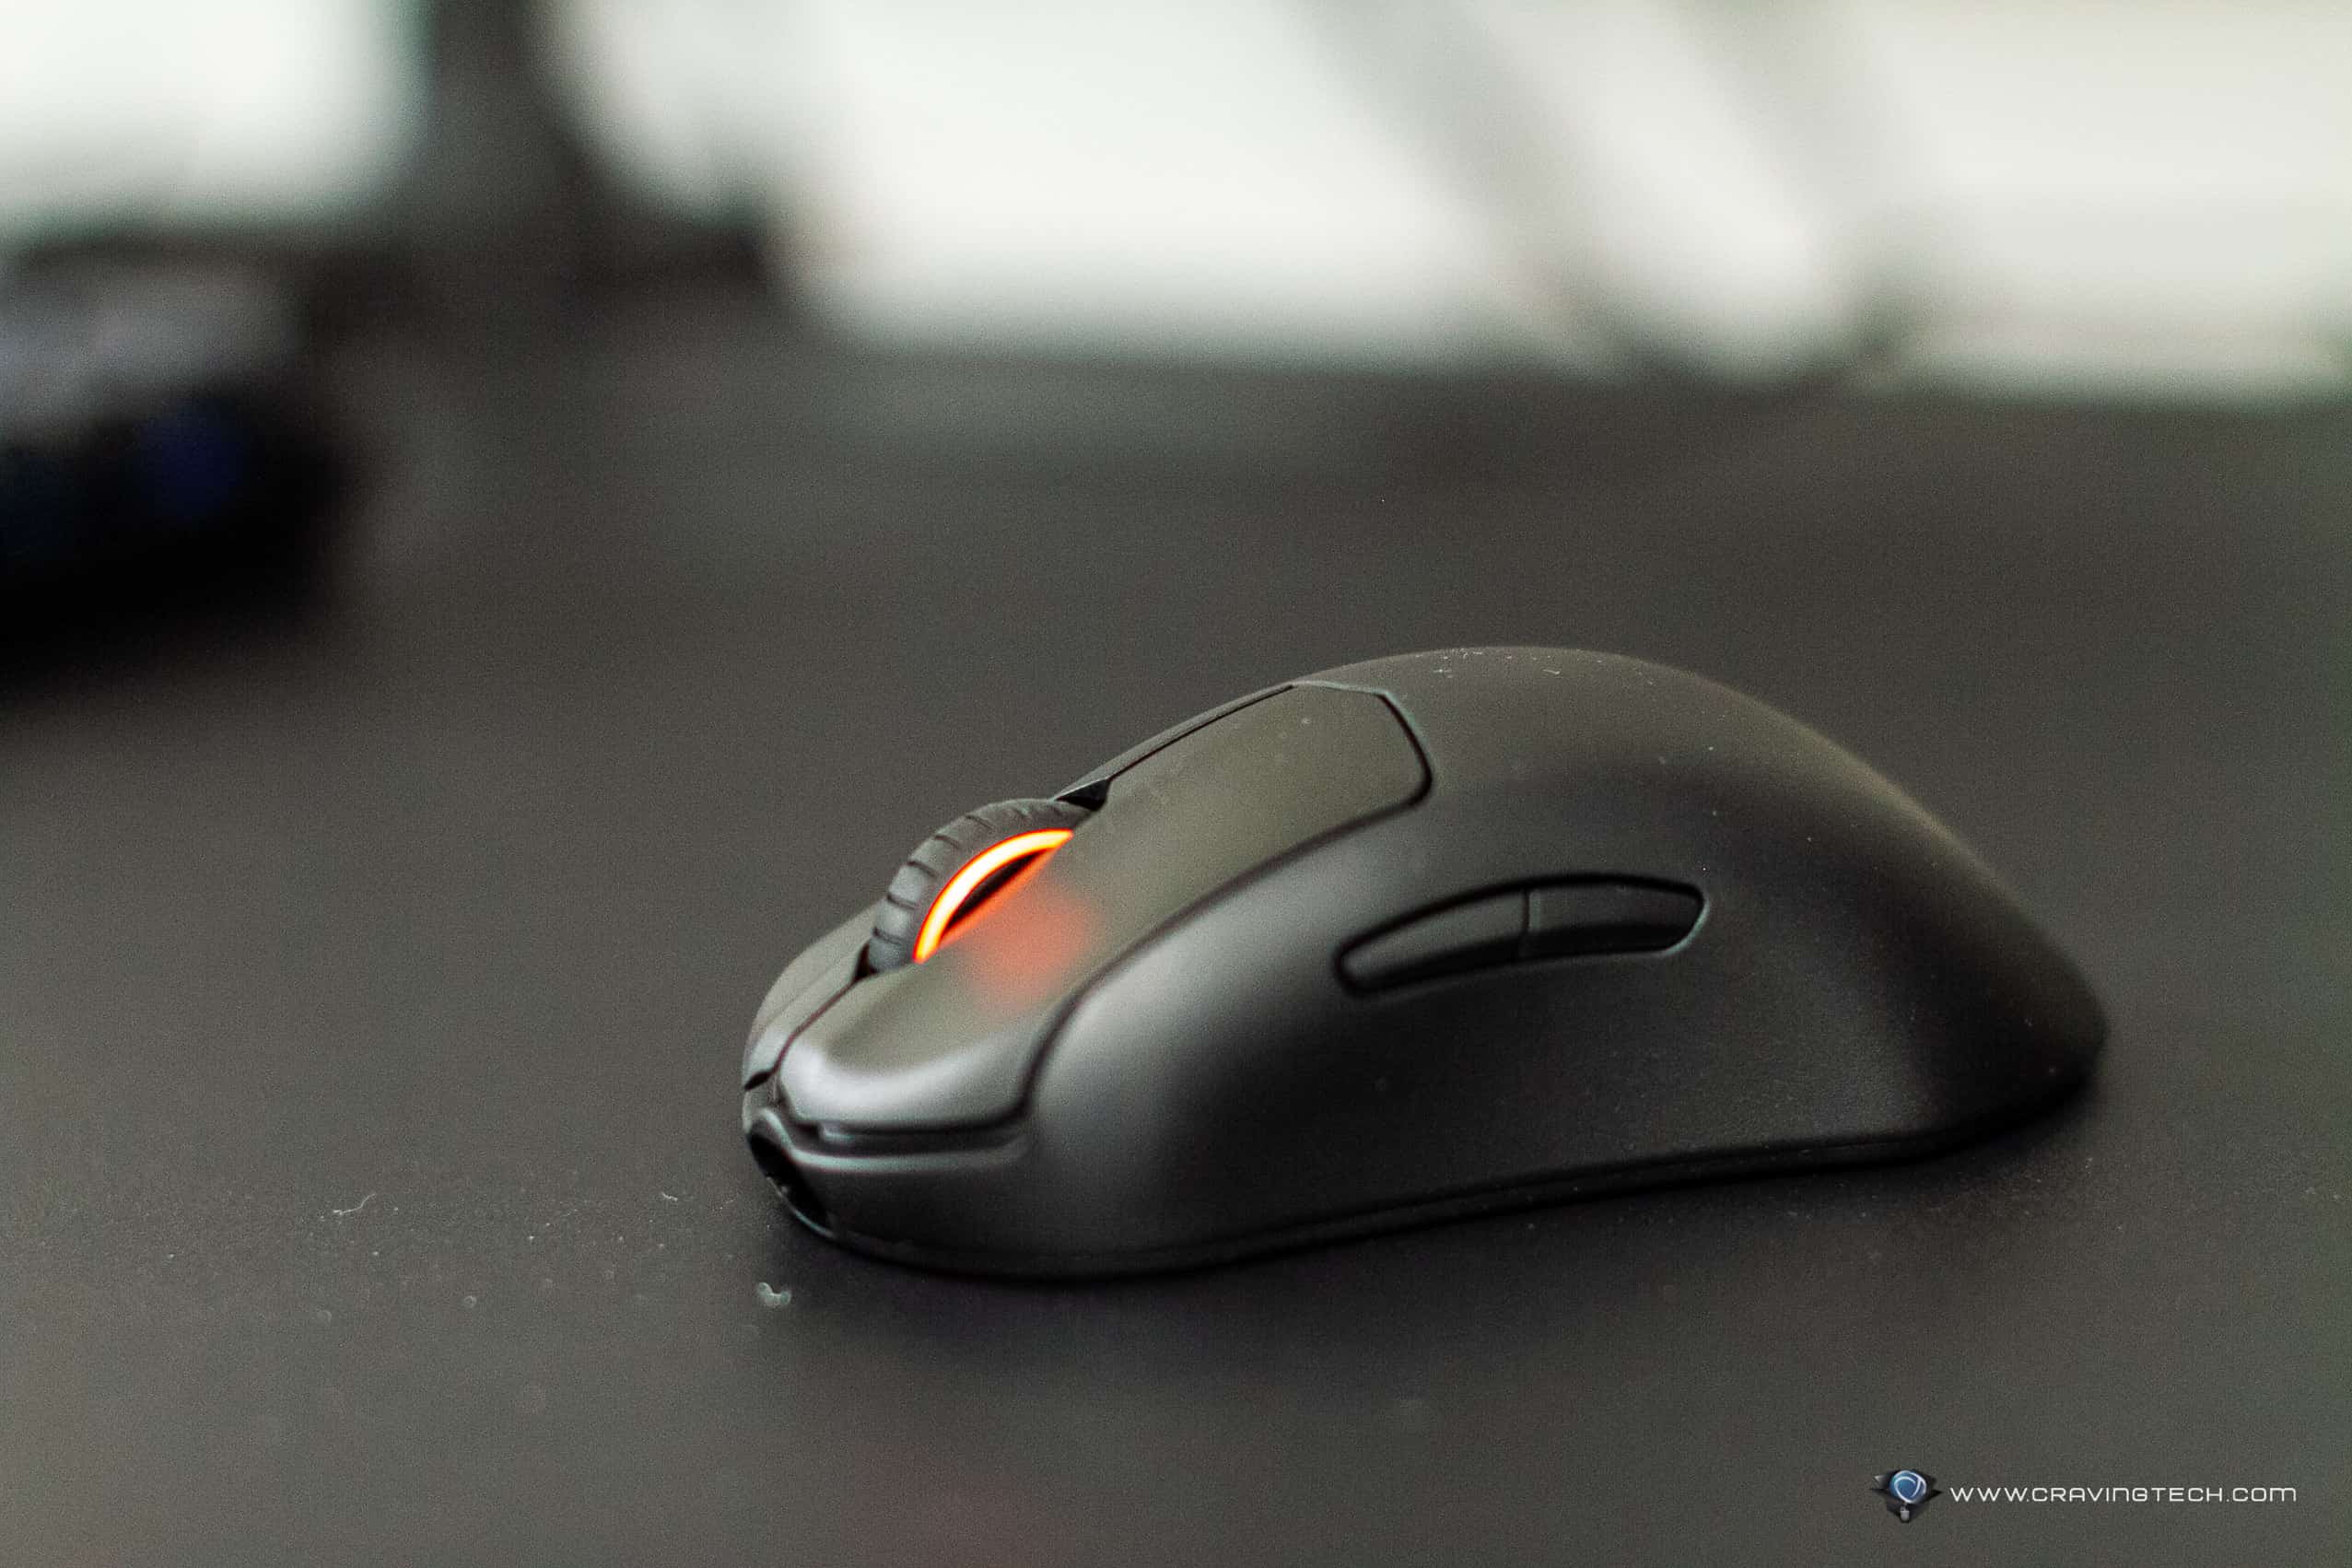 SteelSeries-Prime-Mini-Wireless-Review